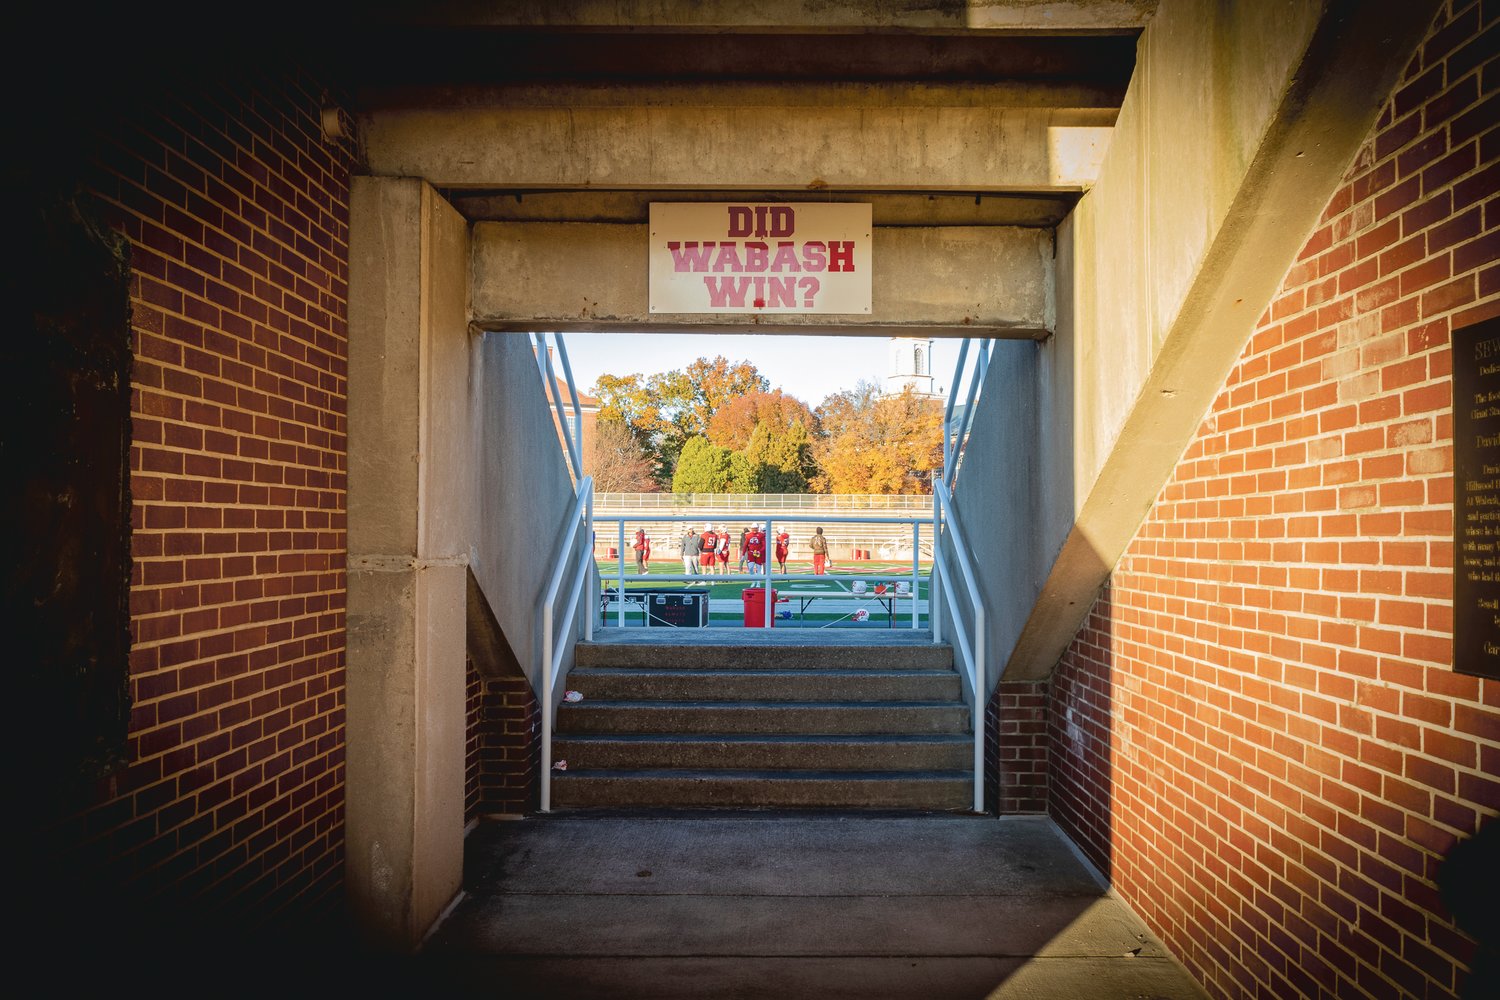 For a final time at Hollett Little Giant Stadium, Wabash football players ran out of the tunnel and onto the field Saturday afternoon.